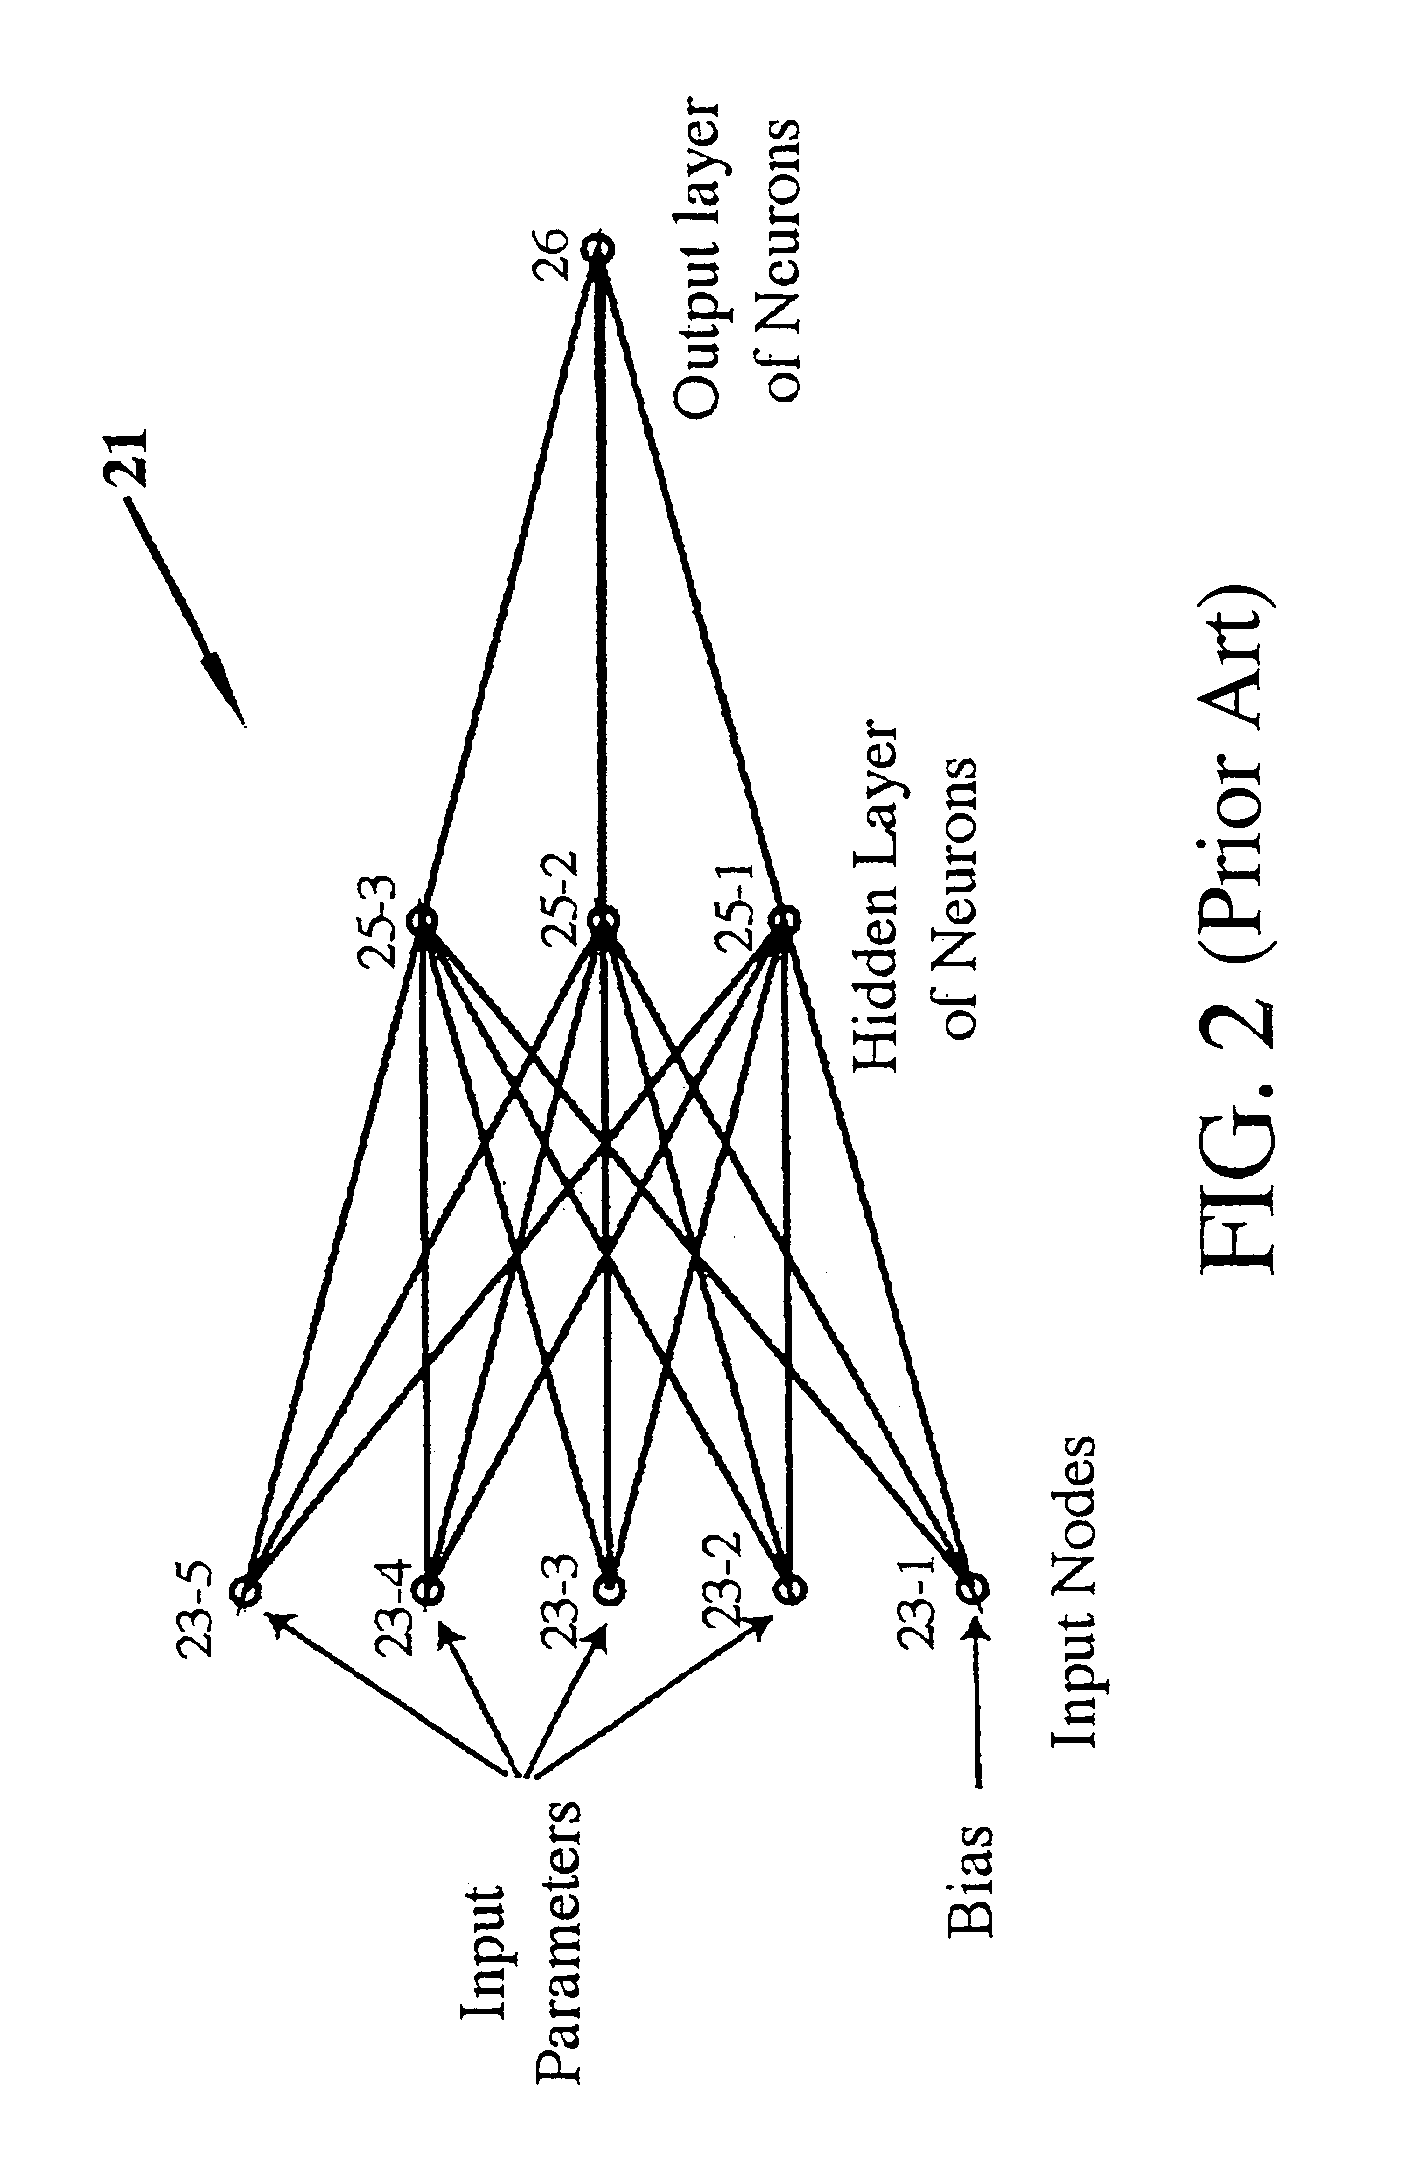 Hybrid neural network and support vector machine method for optimization